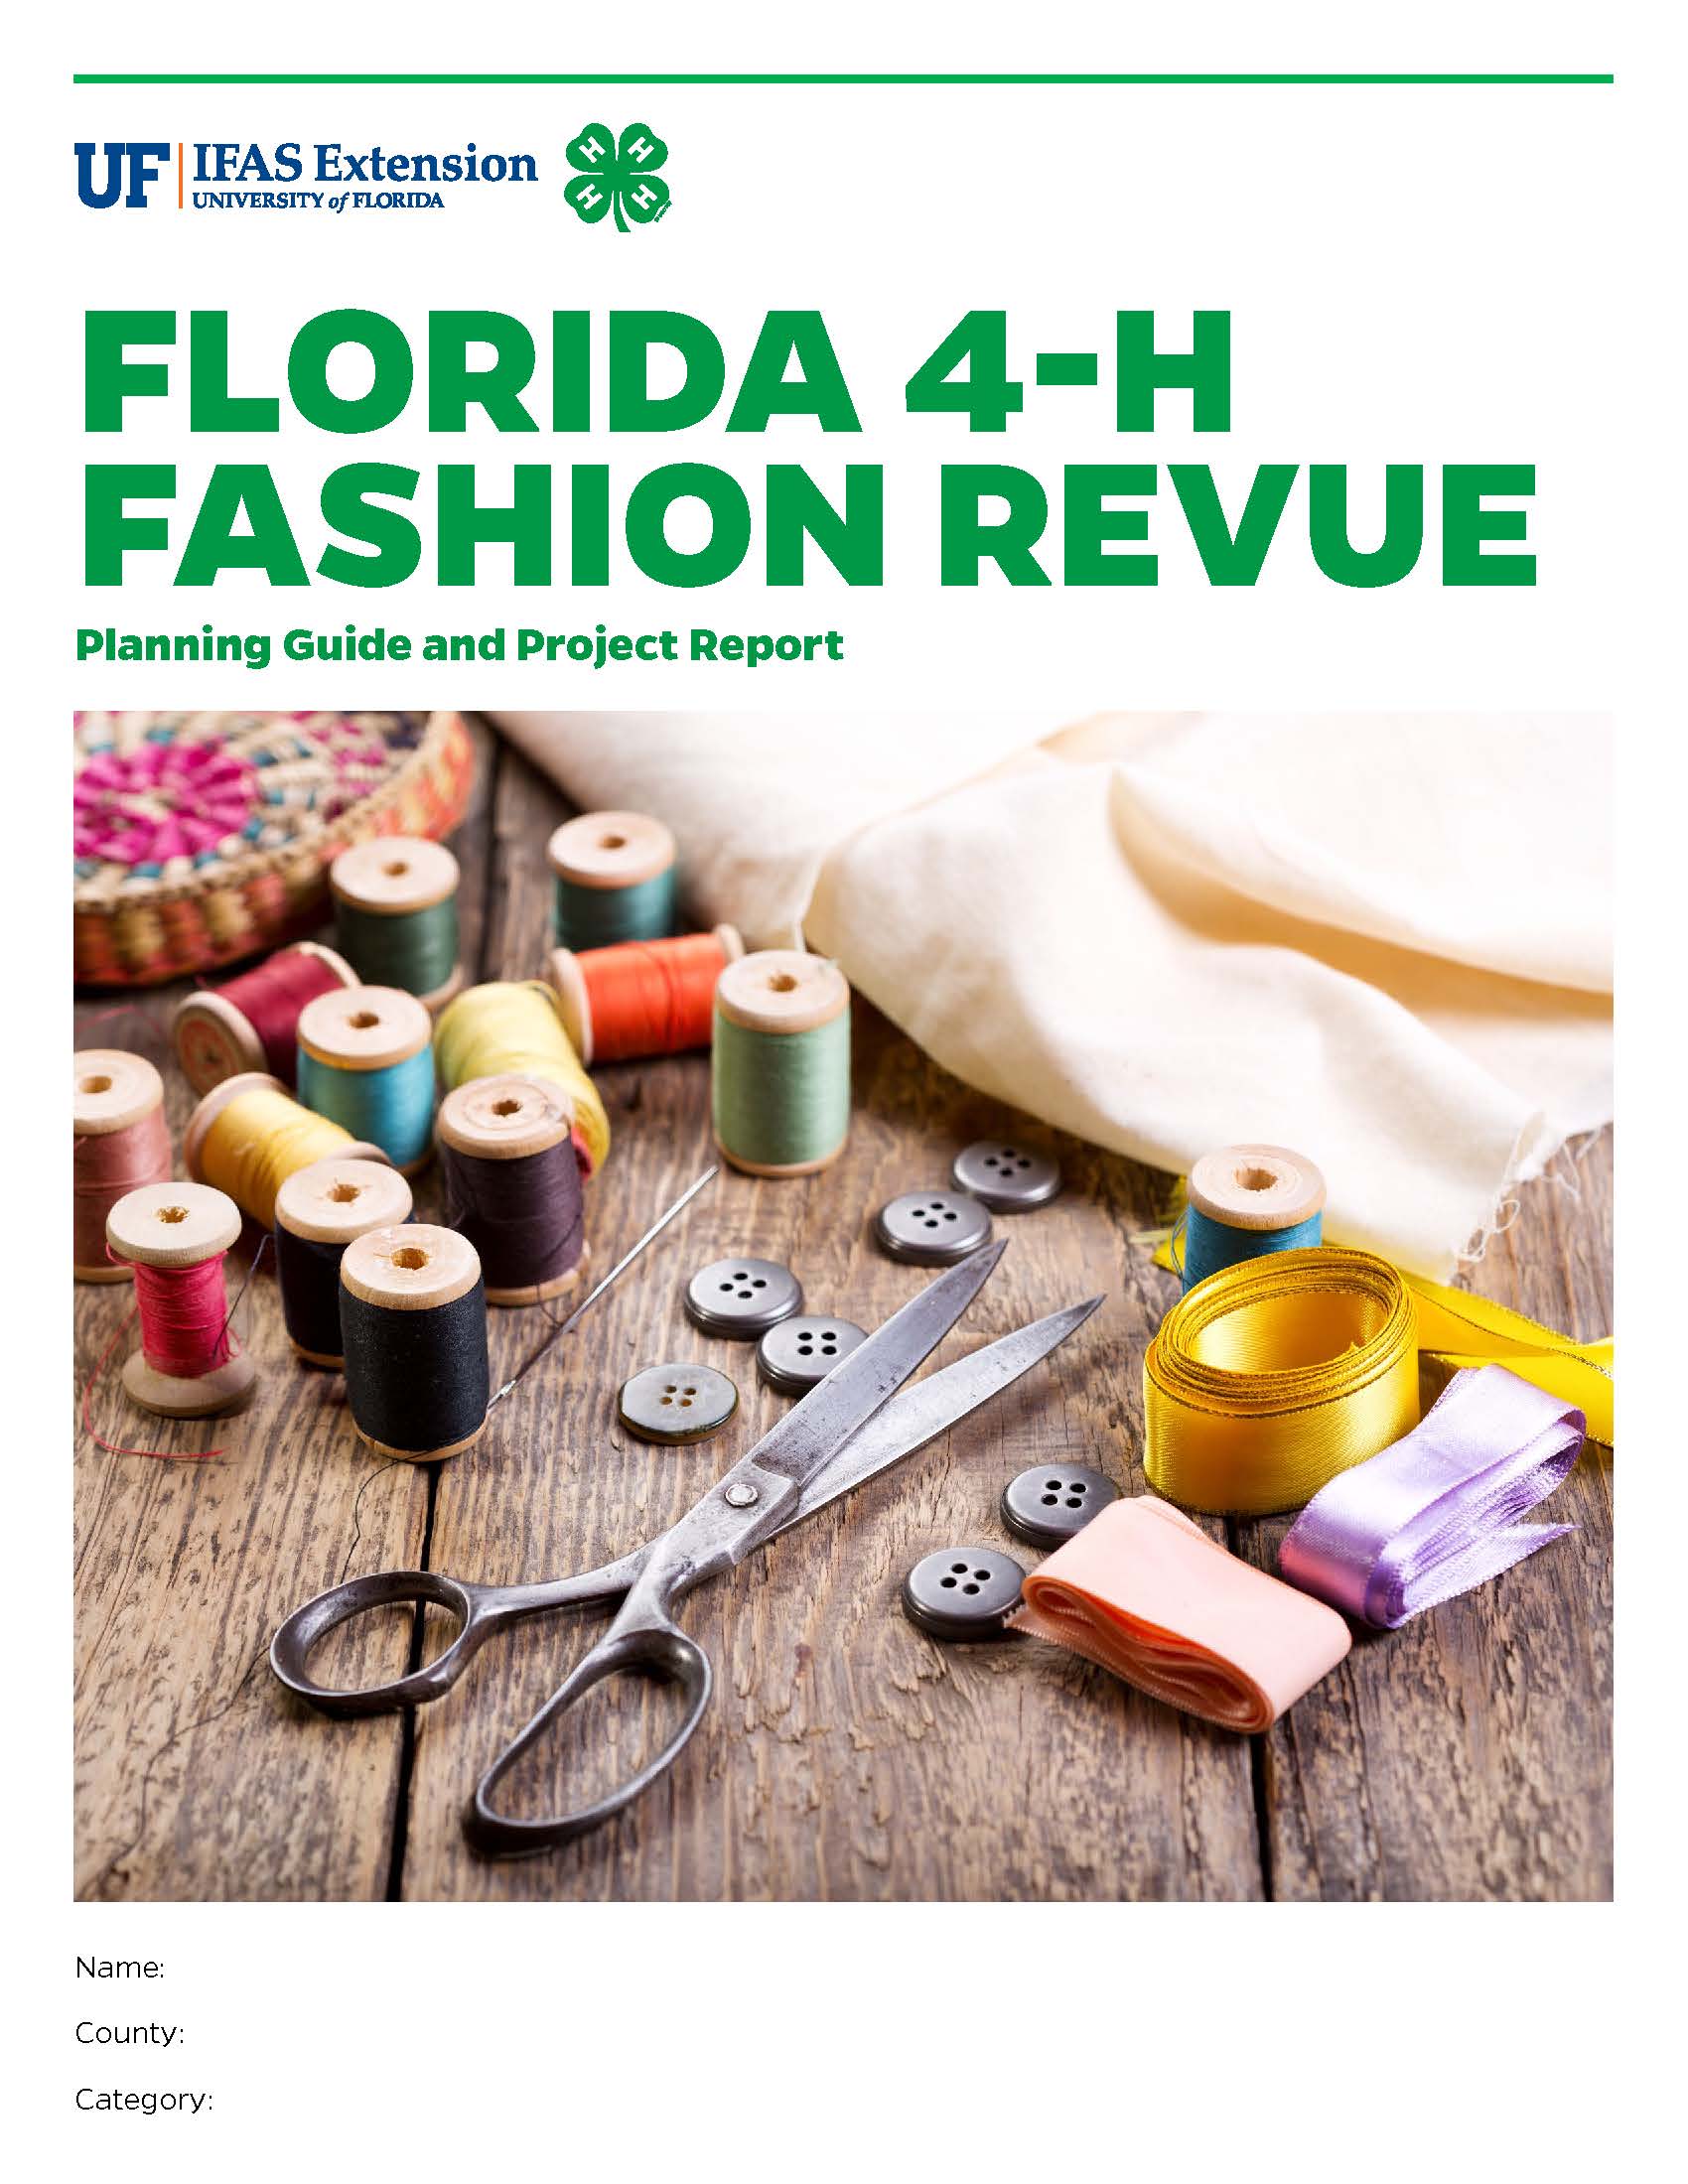 Guide cover featuring sewing supplies: spools, ribbon, fabrics, and scissors.